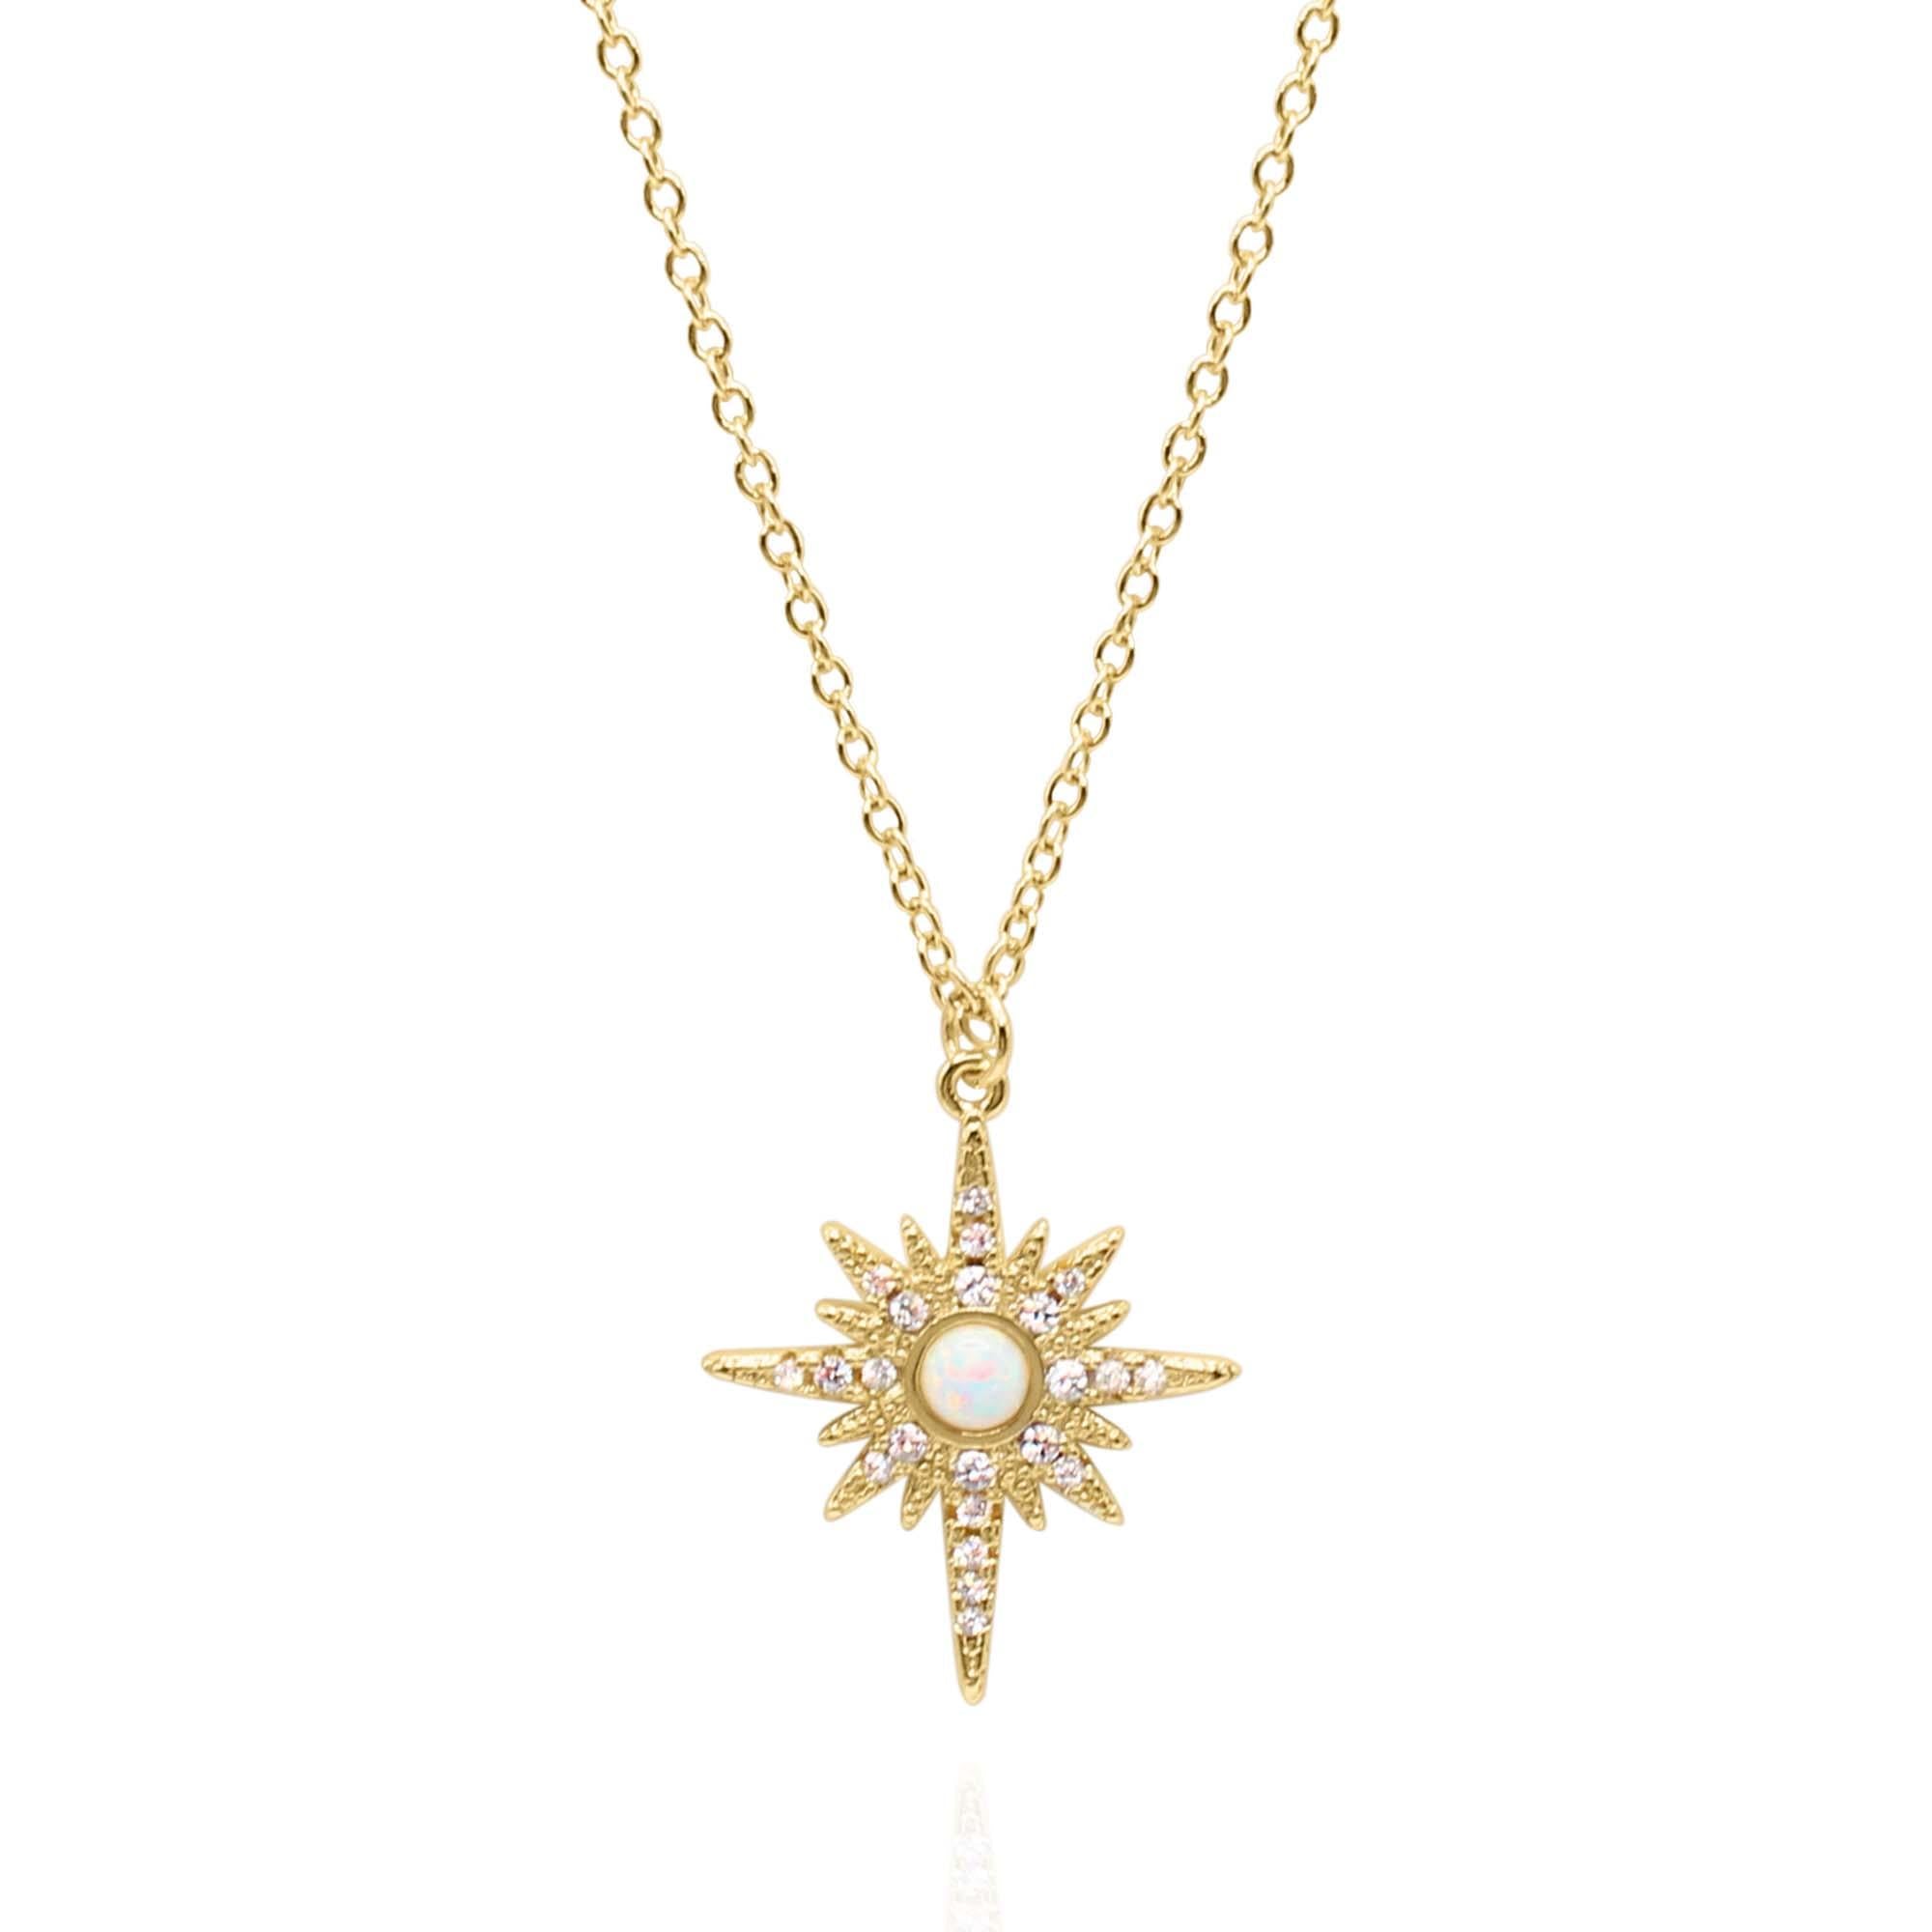 North Star Pendant Necklace | 18K Gold Plated